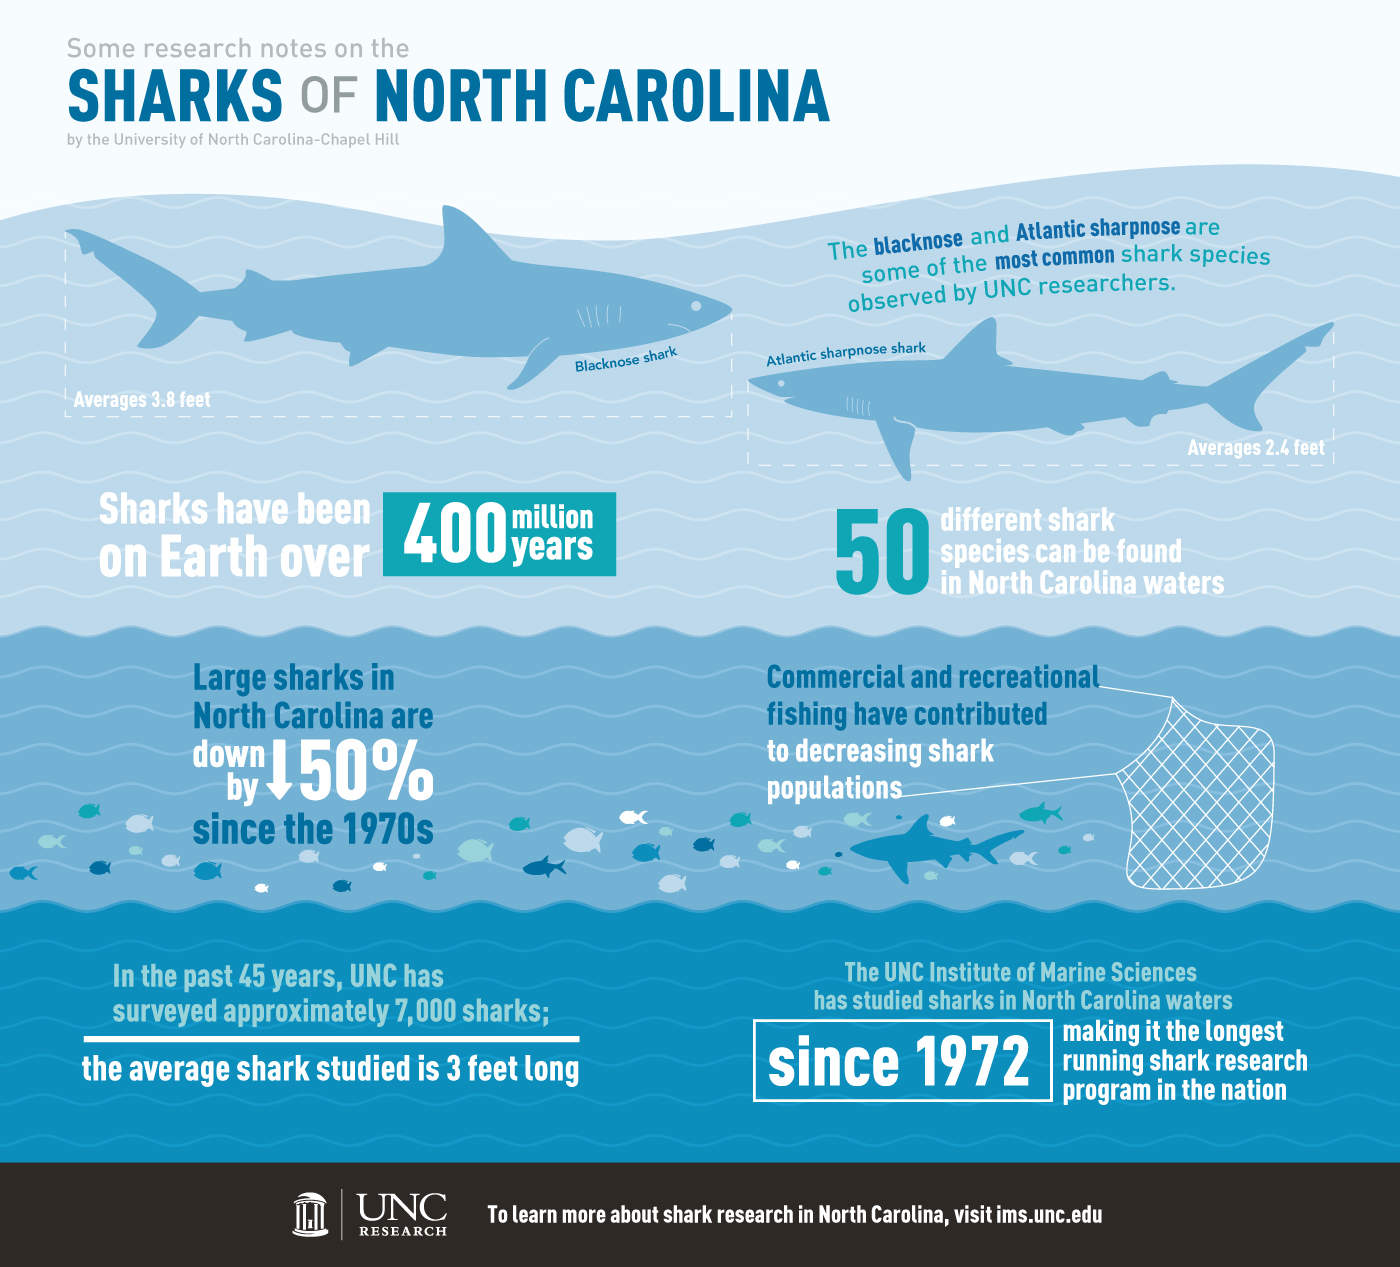 Infographic: Some Research notes on the Sharks of North Carolina by the University of North Carolina-Chapel Hill. The blacknose and Atlantic sharpenose are some of the most common shark species observed by UNC Researchers. Blacknose shark averages 8.3 feet and the Atlantic sharpnose shark averages 2.4 feet. Sharks have been on Earth over 400 million year. 50 different shark species can be found in North Carolina waters. Large sharks in North Carolina are down by 50% since the 1970s. Commercial and recreational fishing have contributed to decreasing shark populations. In the past 45 years, UNC has surveyed approximately 7,000 sharks; the average shark studies is 3 feet long. The UNC institute of Marine Sciences has studies sharks in North Carolina waters since 1972, making it the longest running shark research program in the nation. To learn more about shark research in North Carolina, visit imc dot unc dot edu.